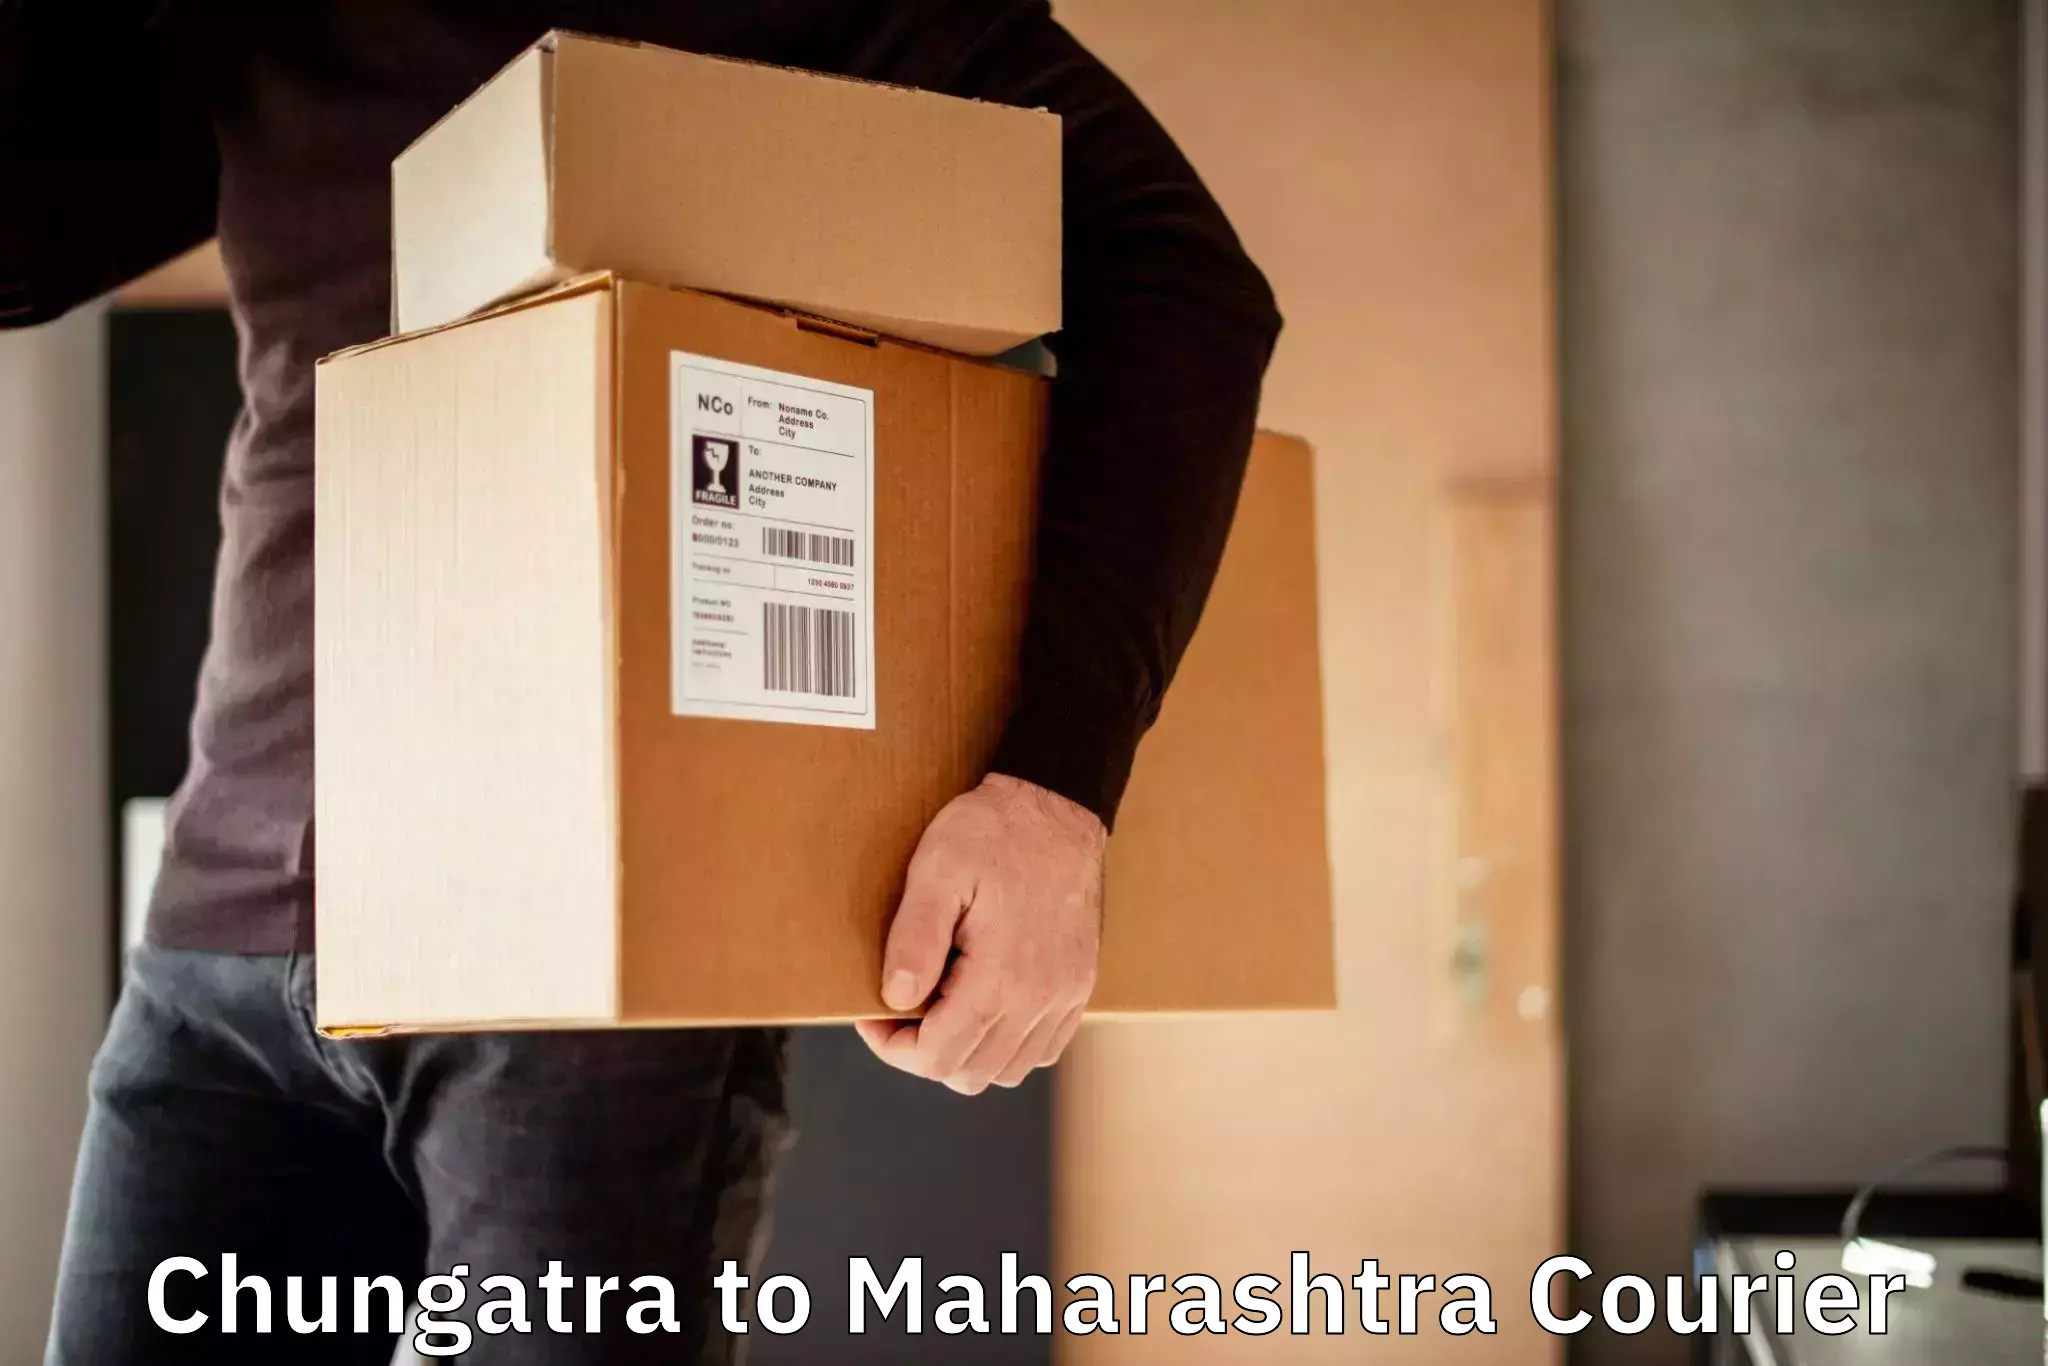 Custom courier packages Chungatra to Sinnar